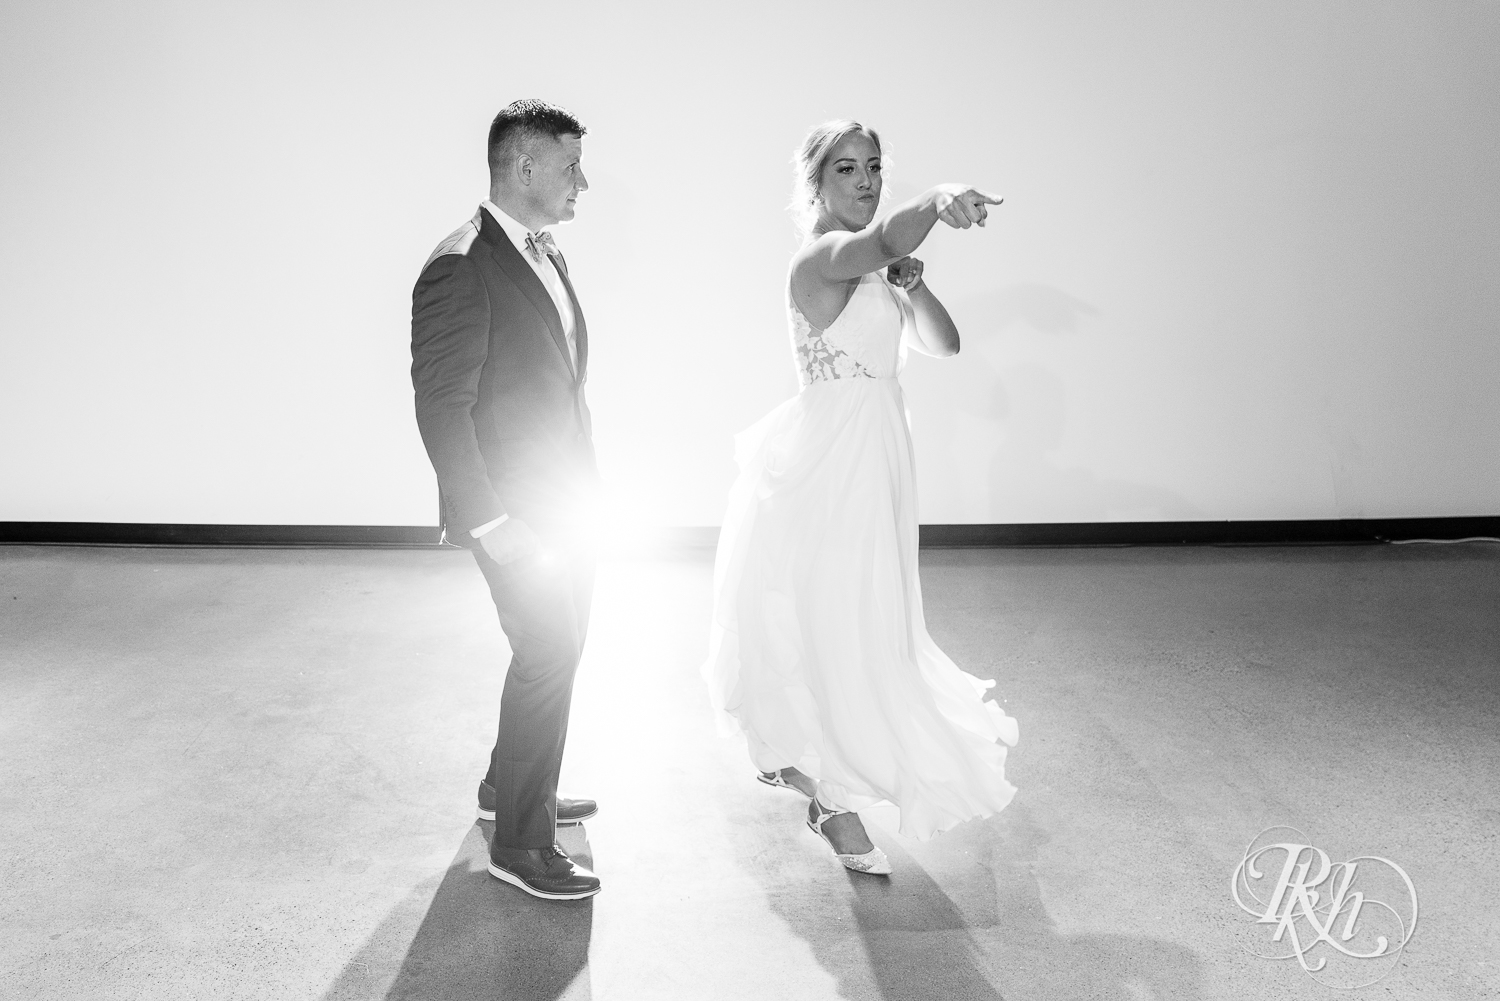 Bride and groom share first dance during wedding at Saint Paul Event Center in Saint Paul, Minnesota.